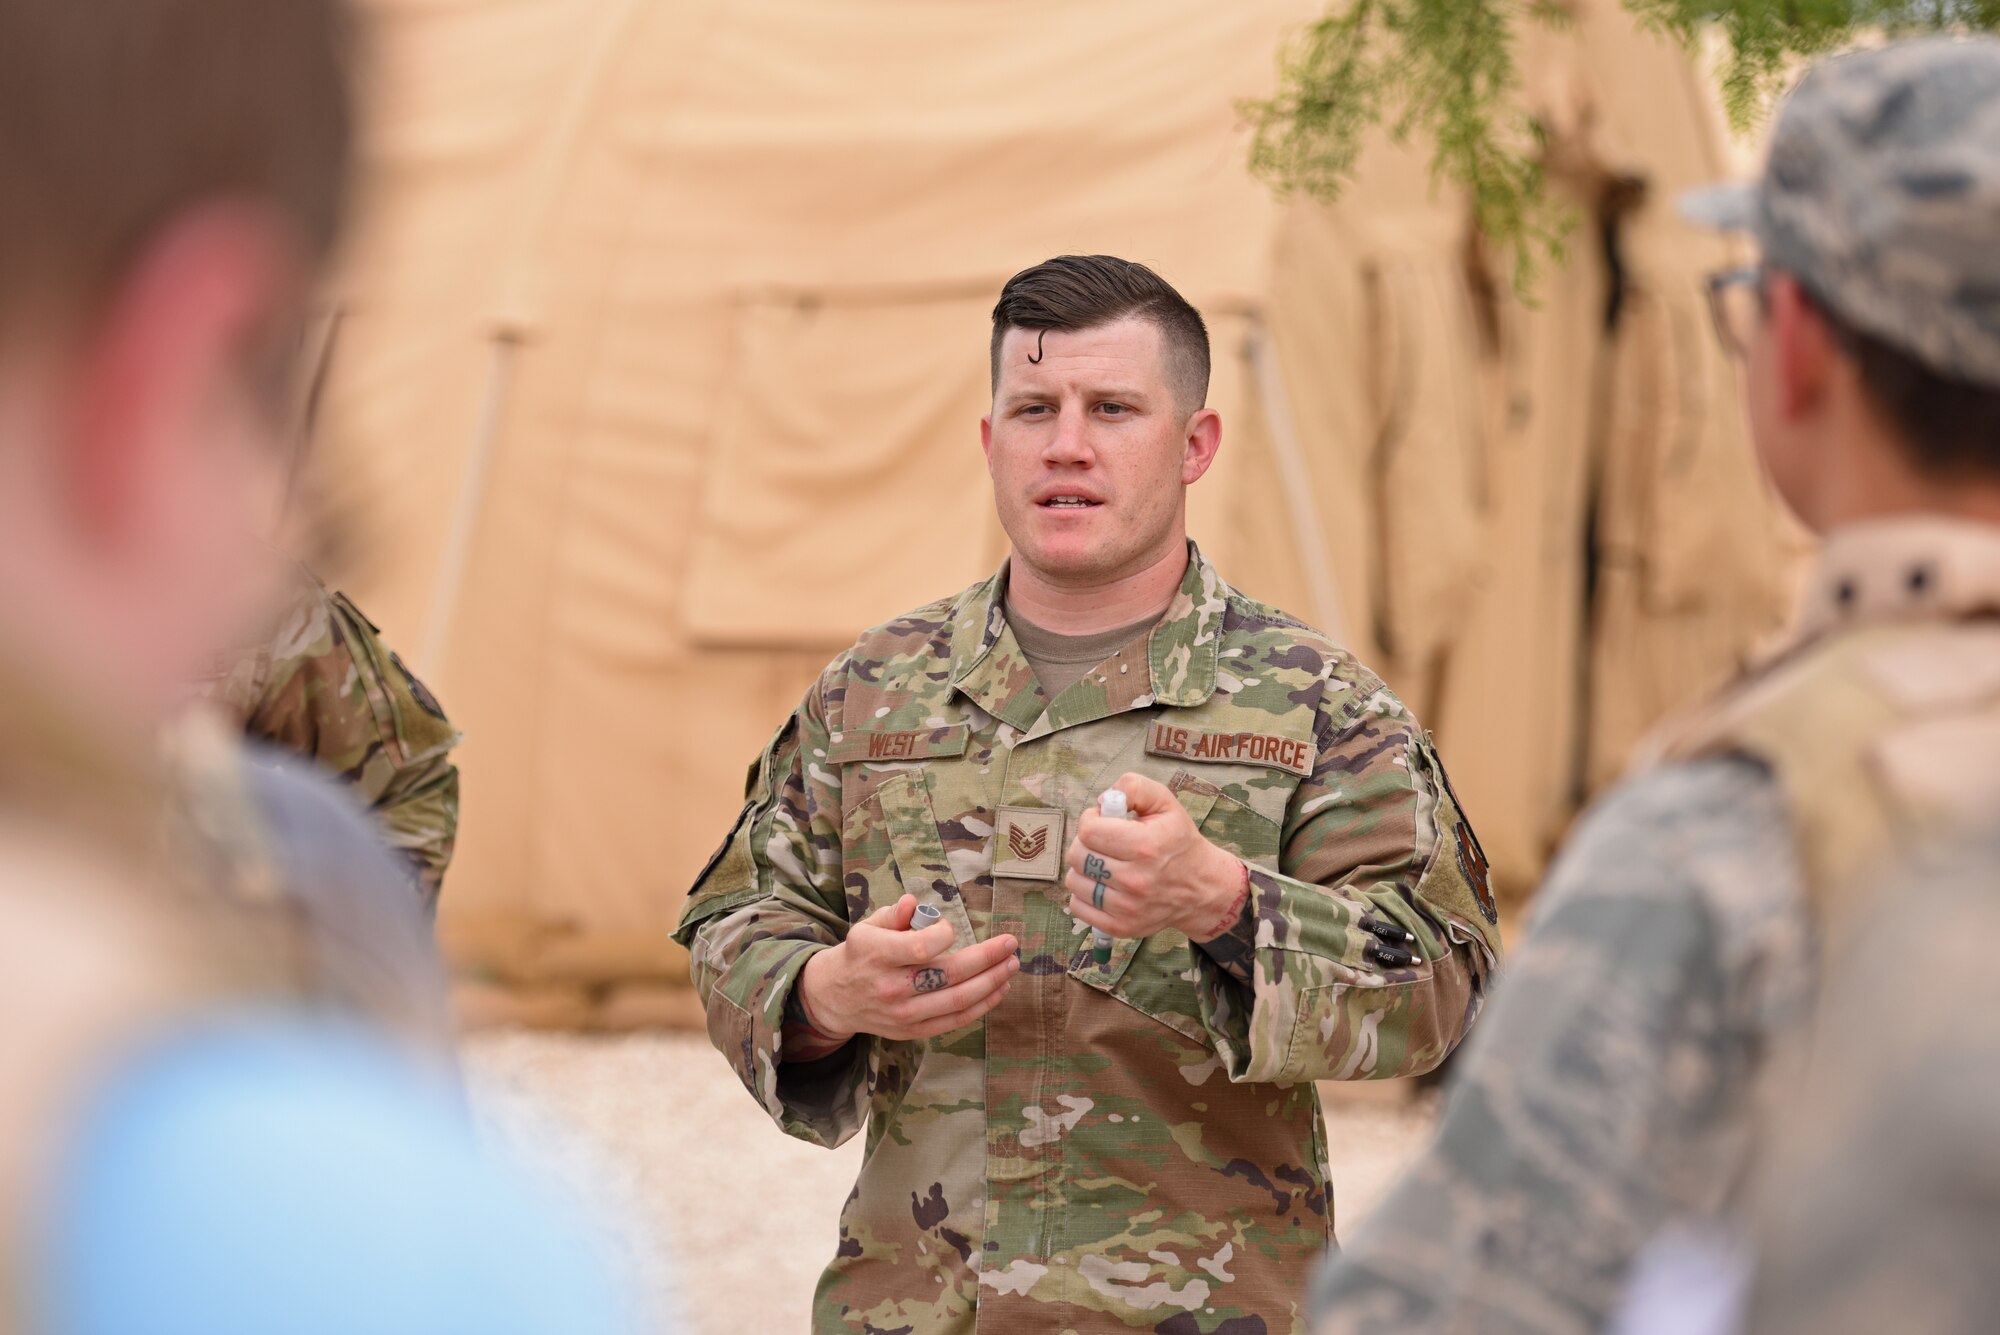 U.S. Air Force Tech. Sgt. Cody West, 17th Civil Engineer Squadron emergency management noncommissioned officer in charge, speaks to Junior Reserve Officers’ Training Corps students during Operation Next Generation at Goodfellow Air Force Base, Texas, May 12, 2023. The students learned about self aid buddy care and hazardous materials as part of the exercise. (U.S. Air Force photo by Senior Airman Ashley Thrash)